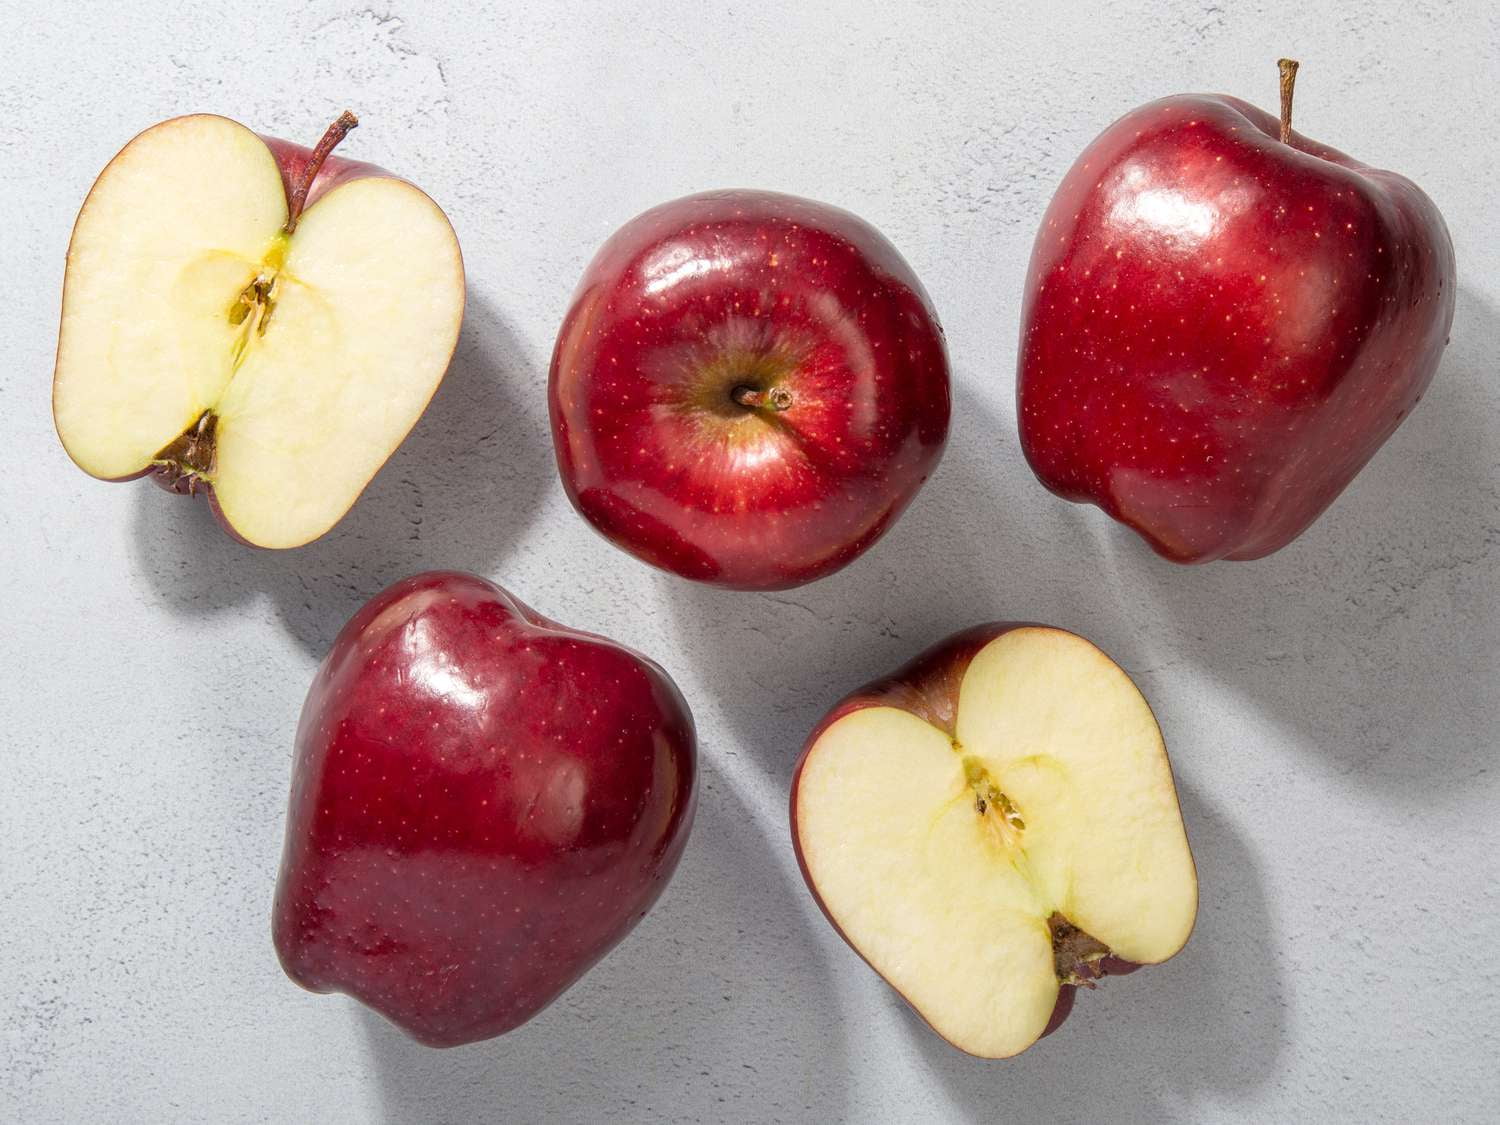 Apple Red (1 Pack of 4) - Fresh To Dommot